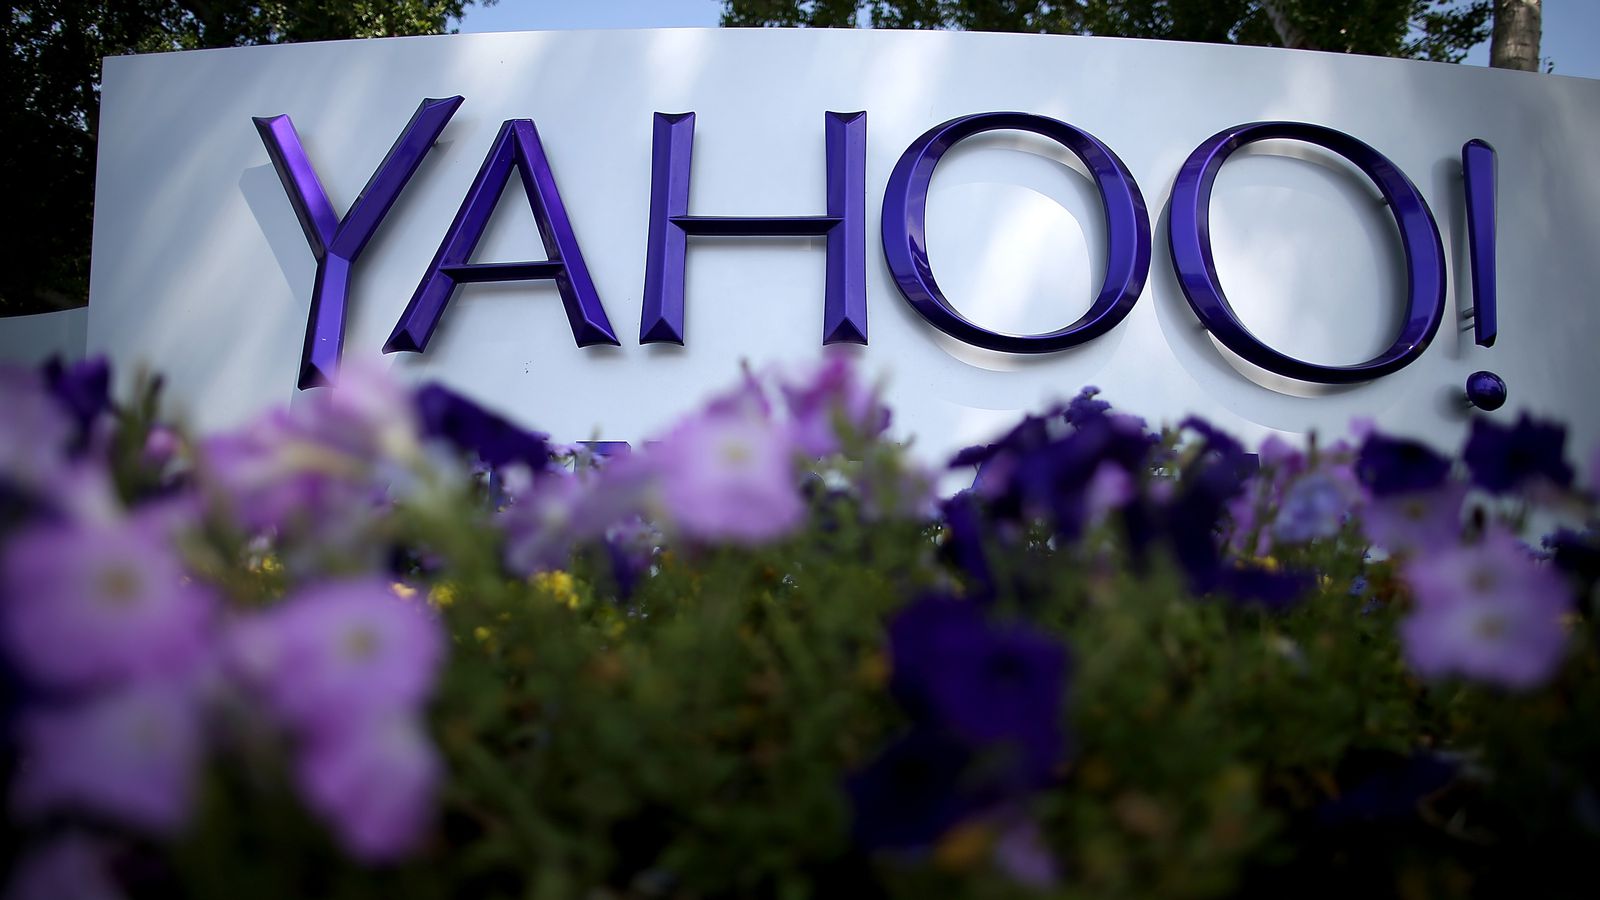 Those affected by Yahoo data breach can soon file claim up to $358